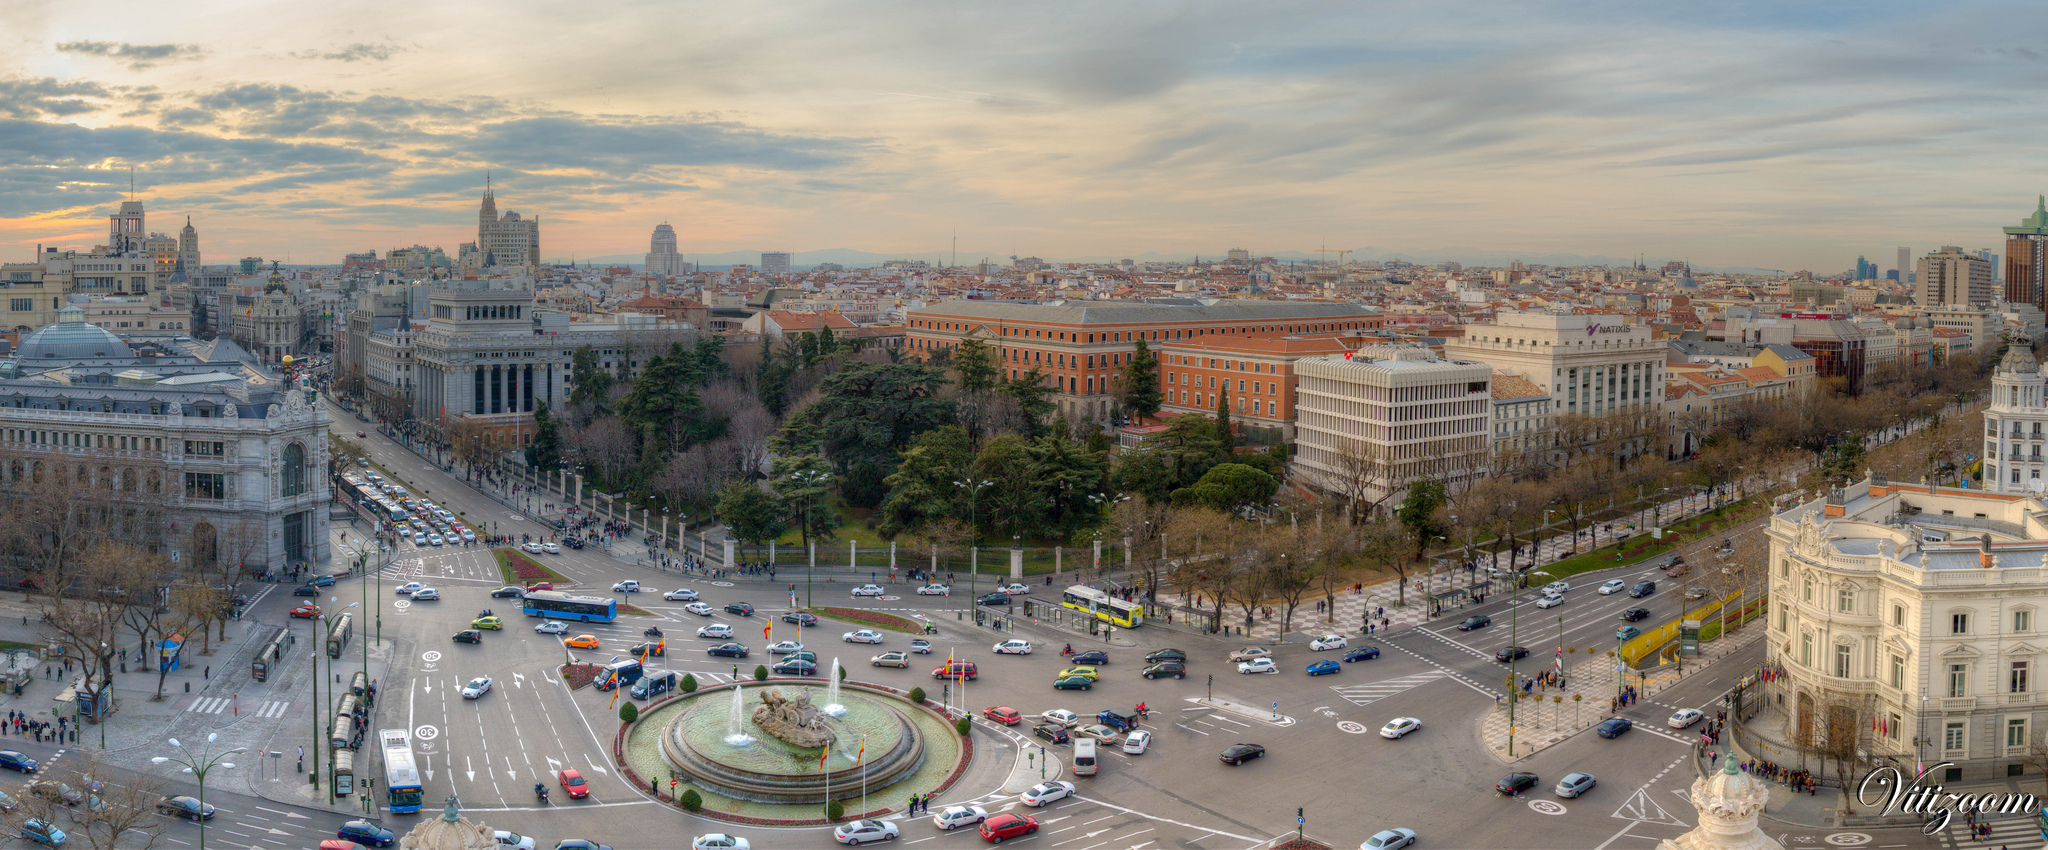 The most spectacular vista points in Madrid